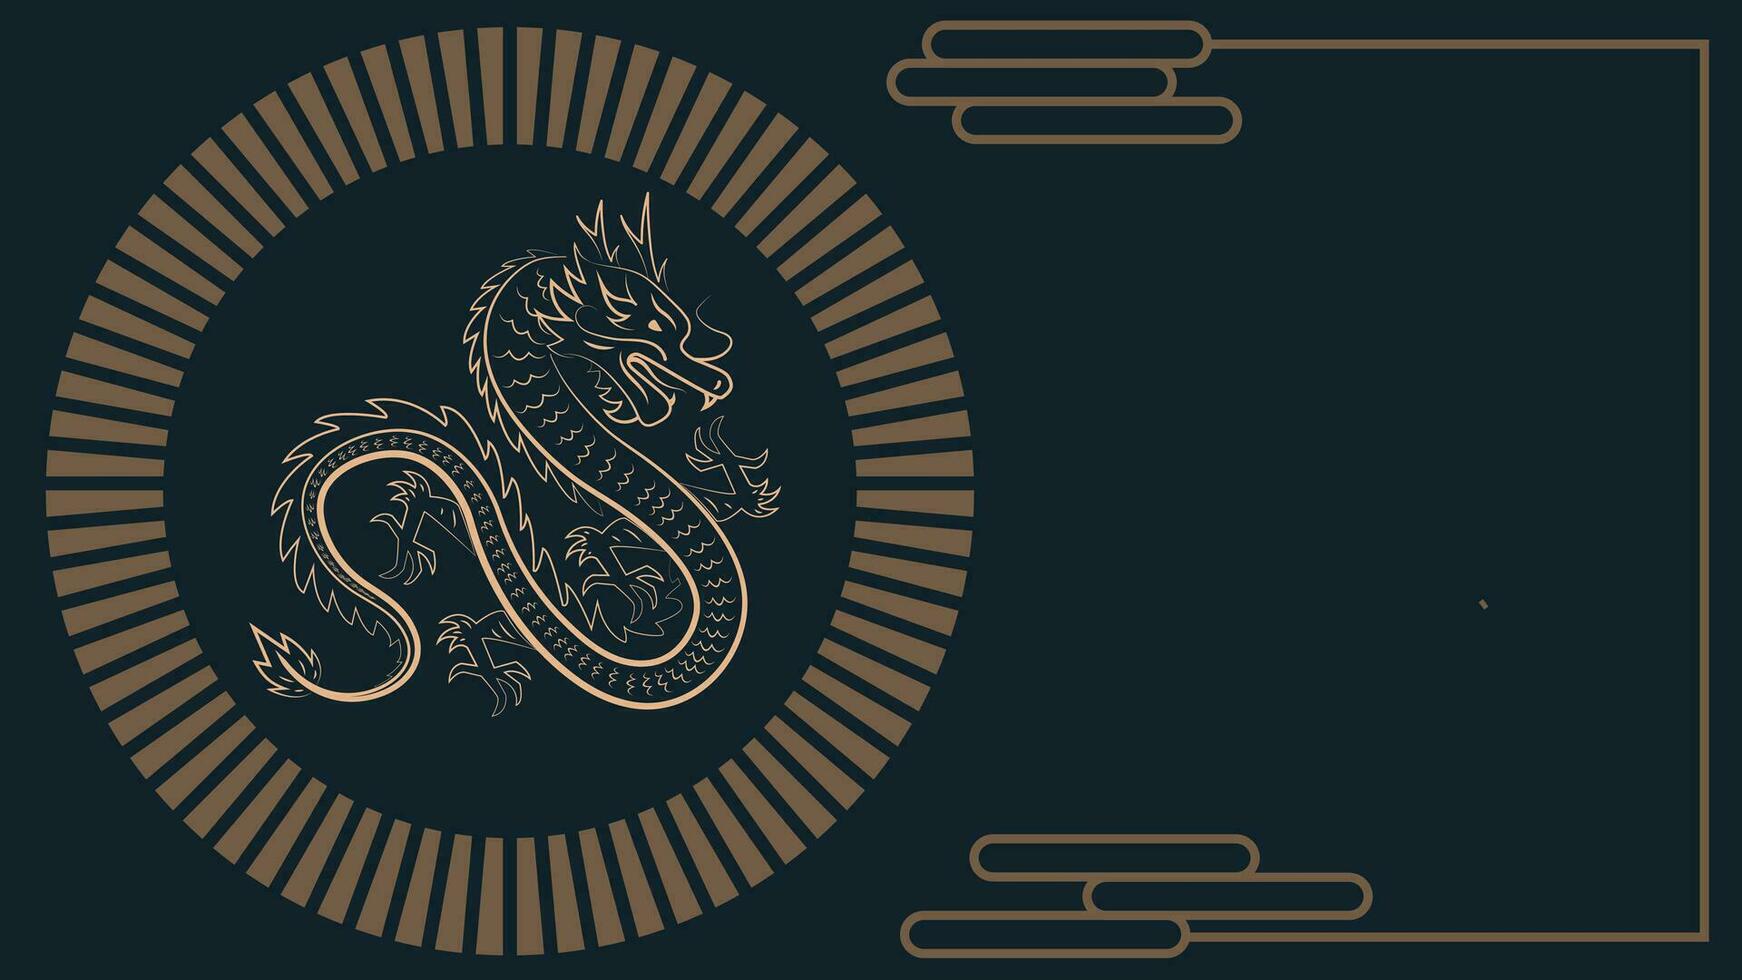 Chinese New Year background vector . Chinese golden dragon, circle pattern, Lunar New Year holiday decoration vector. Oriental culture tradition illustration